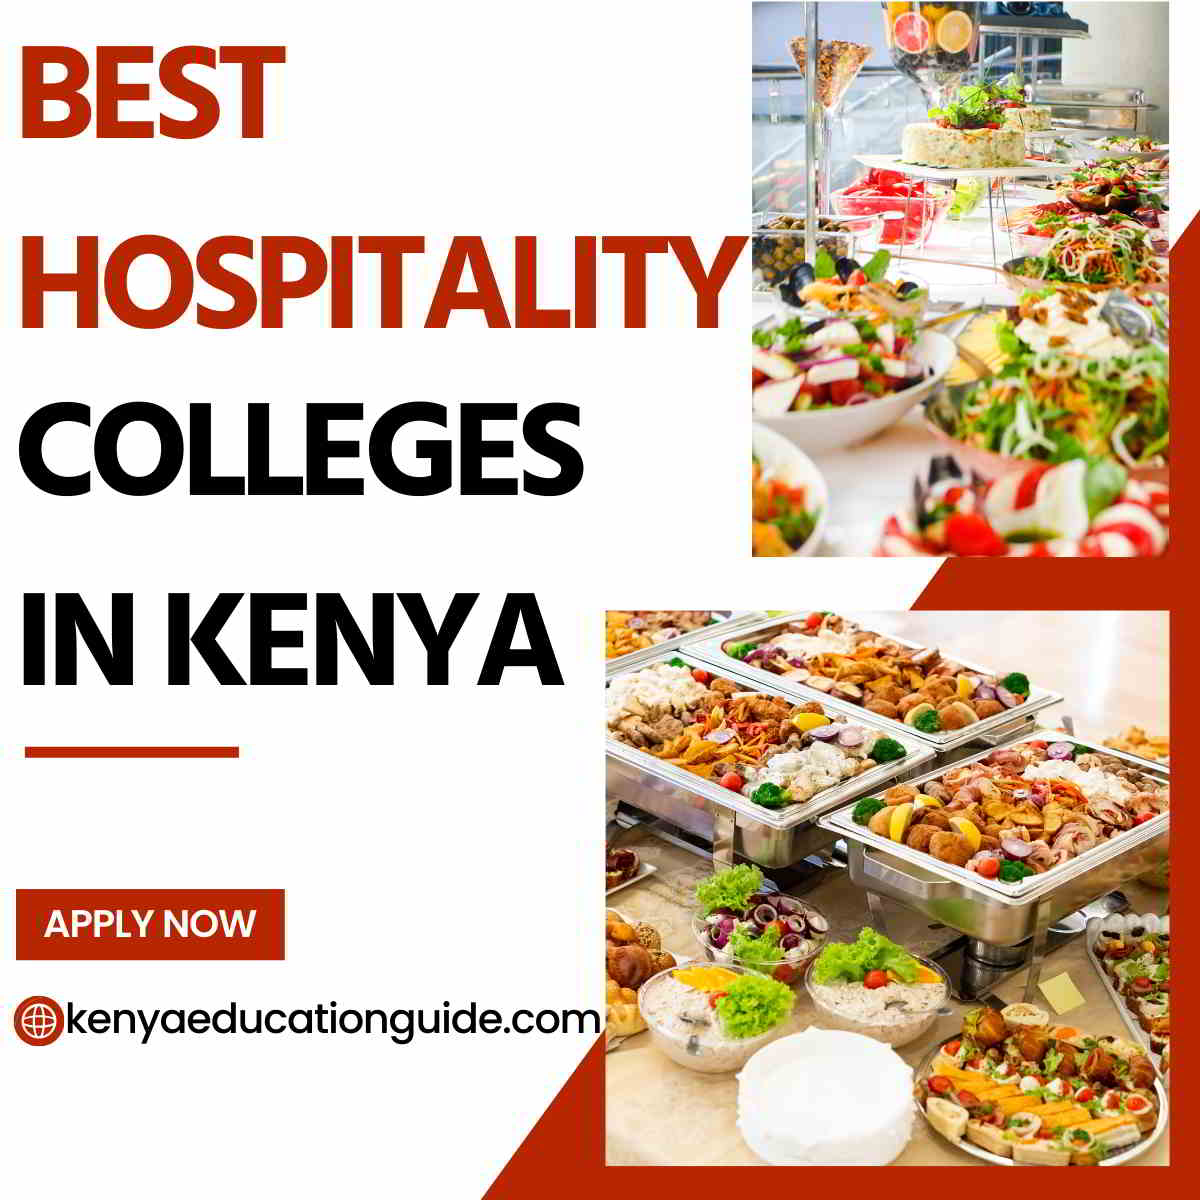 Best hospitality colleges in Kenya